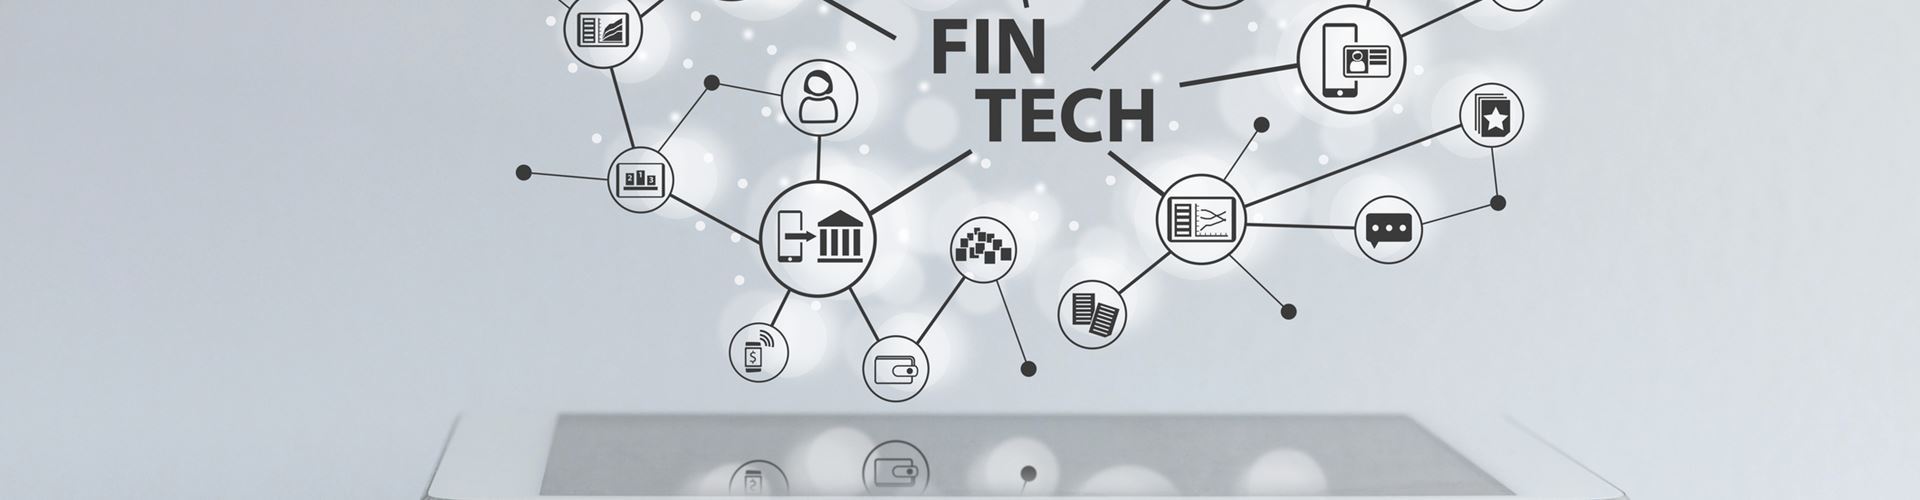 Fintechs entice MBA graduates away from banking and consulting